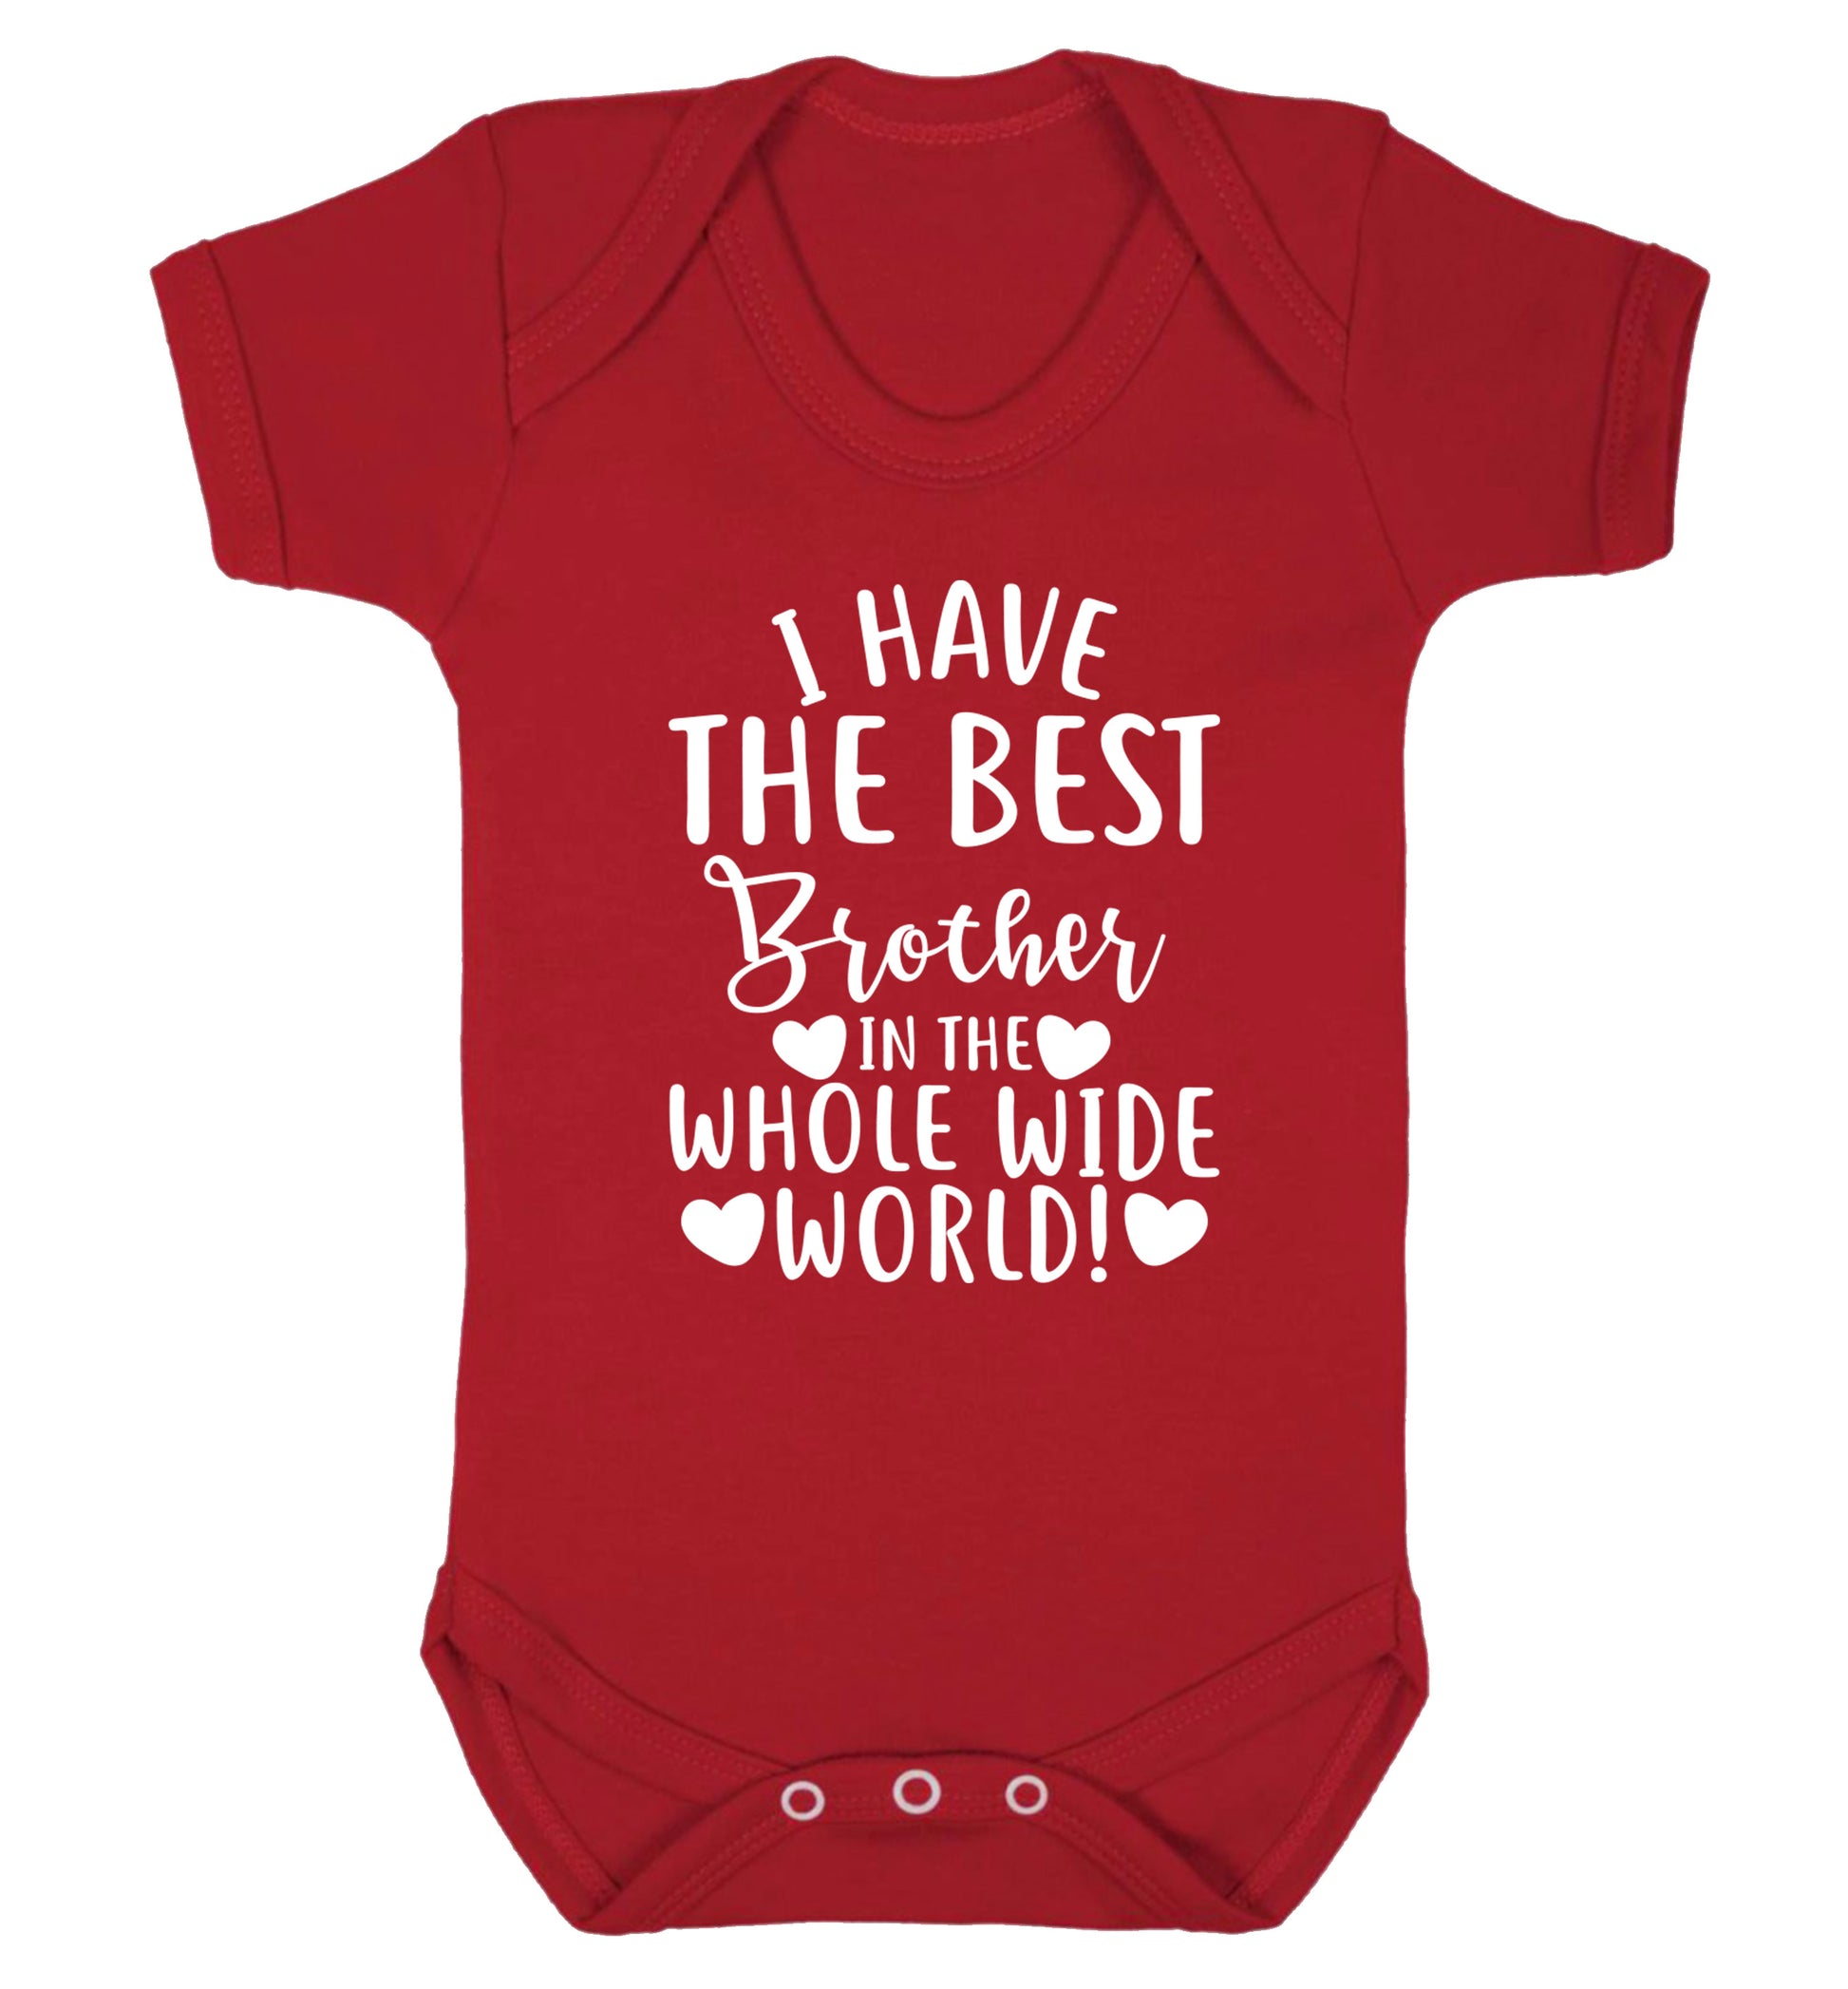 I have the best brother in the whole wide world! Baby Vest red 18-24 months